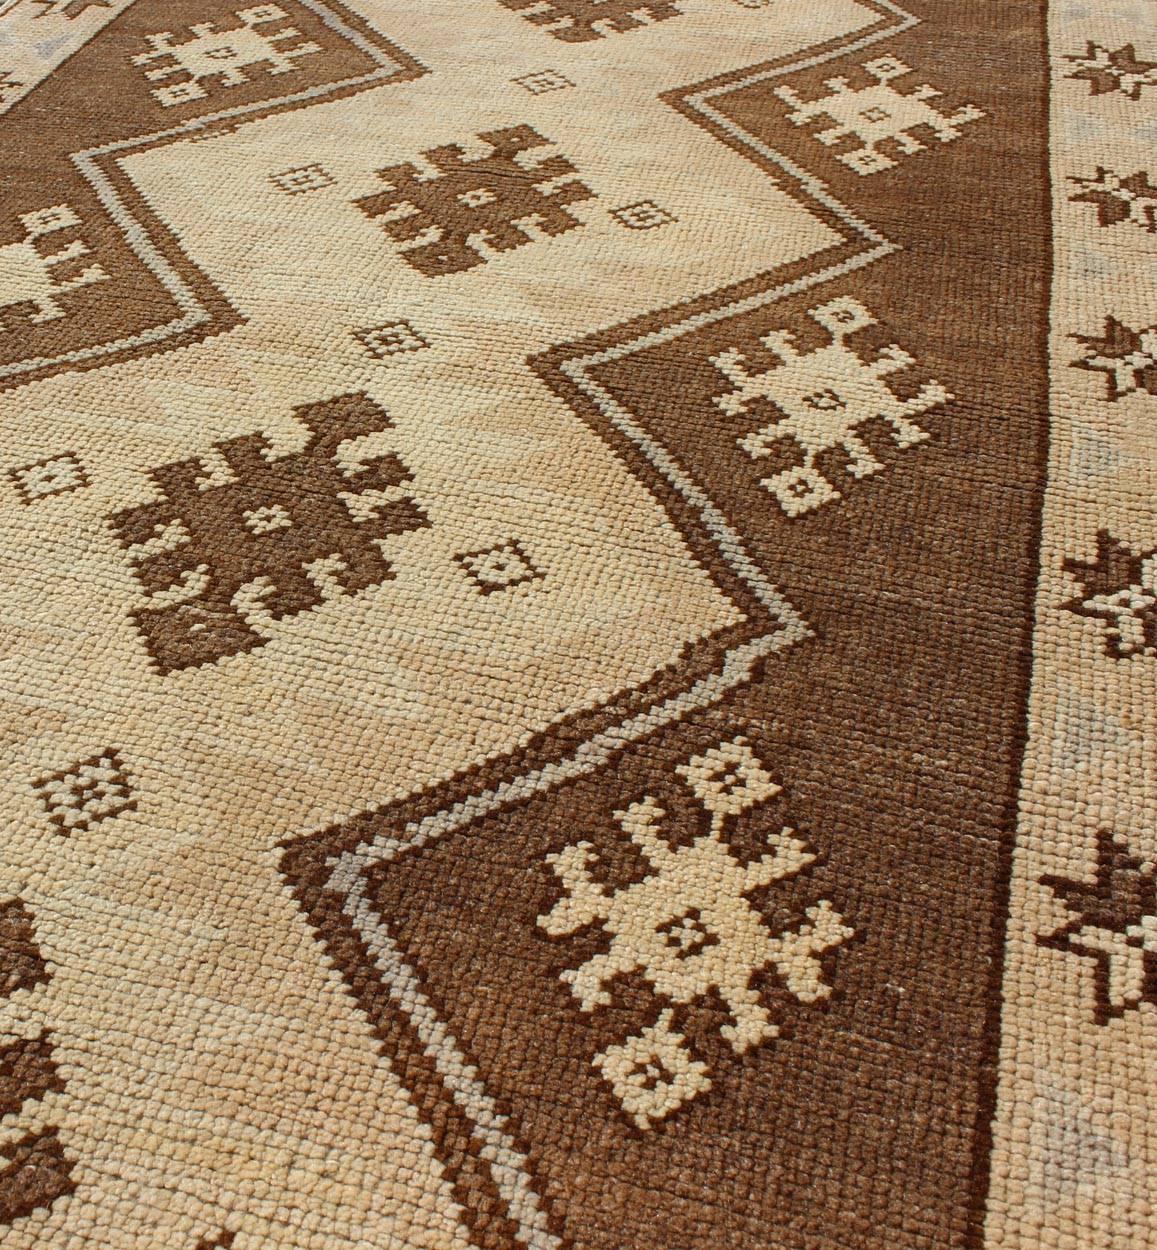 20th Century  Vintage Turkish Oushak Rug with Vertical Diamond Medallions in Brown and Cream